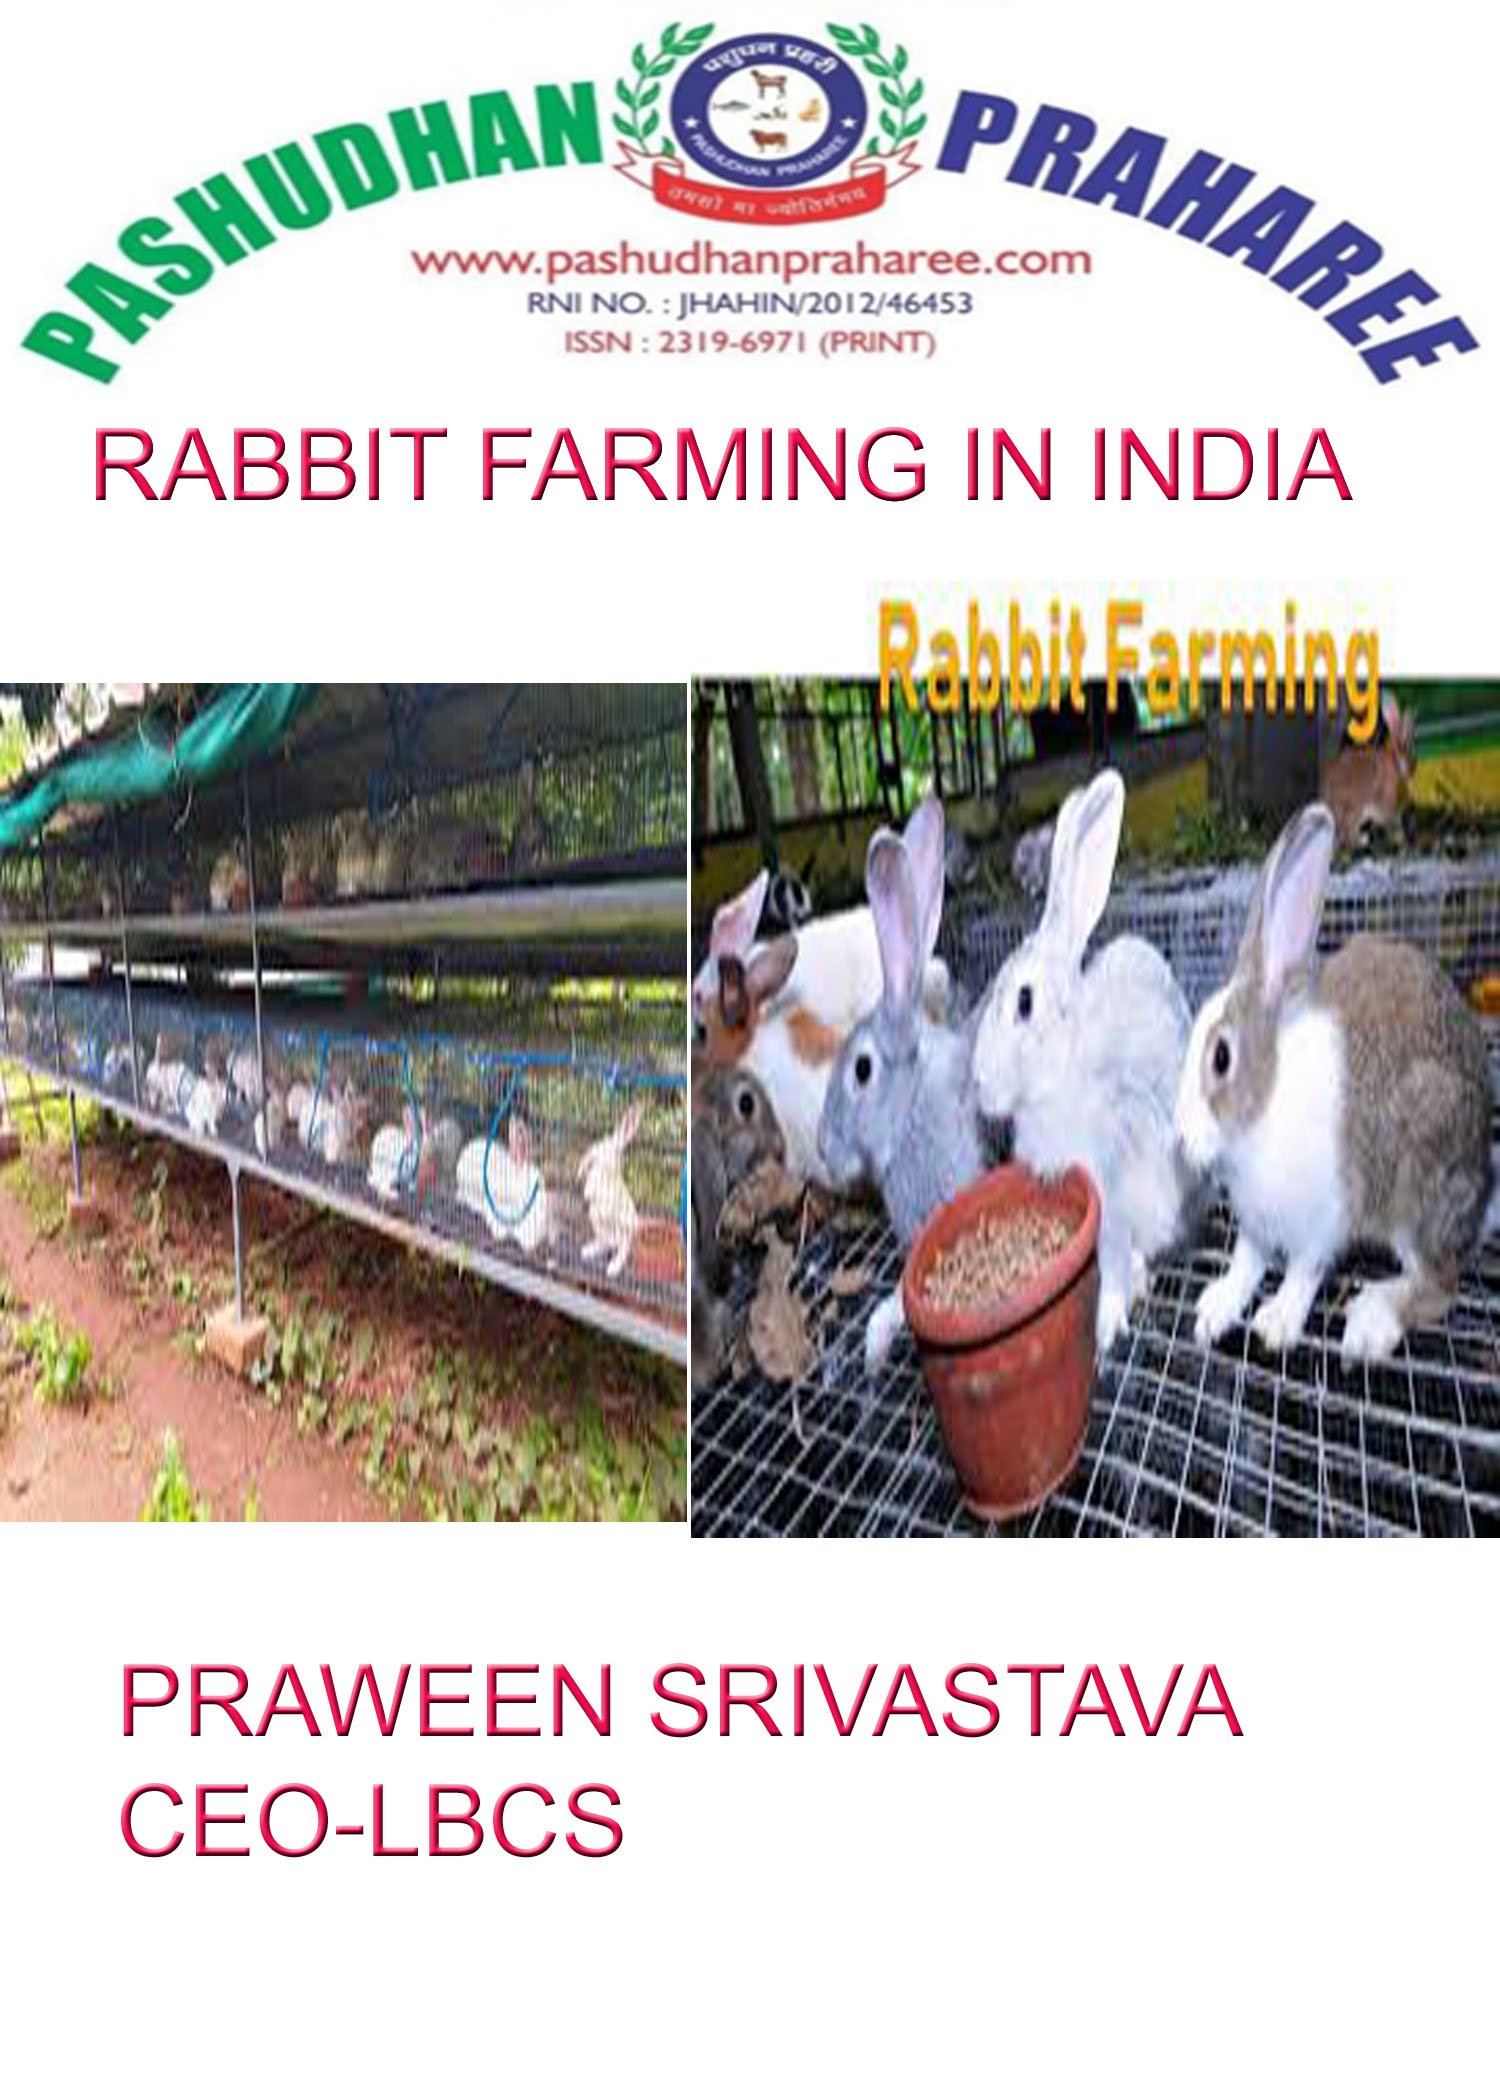 Production and Management Practices for Profitable Commercial Rabbit Farming in India Pashudhan praharee